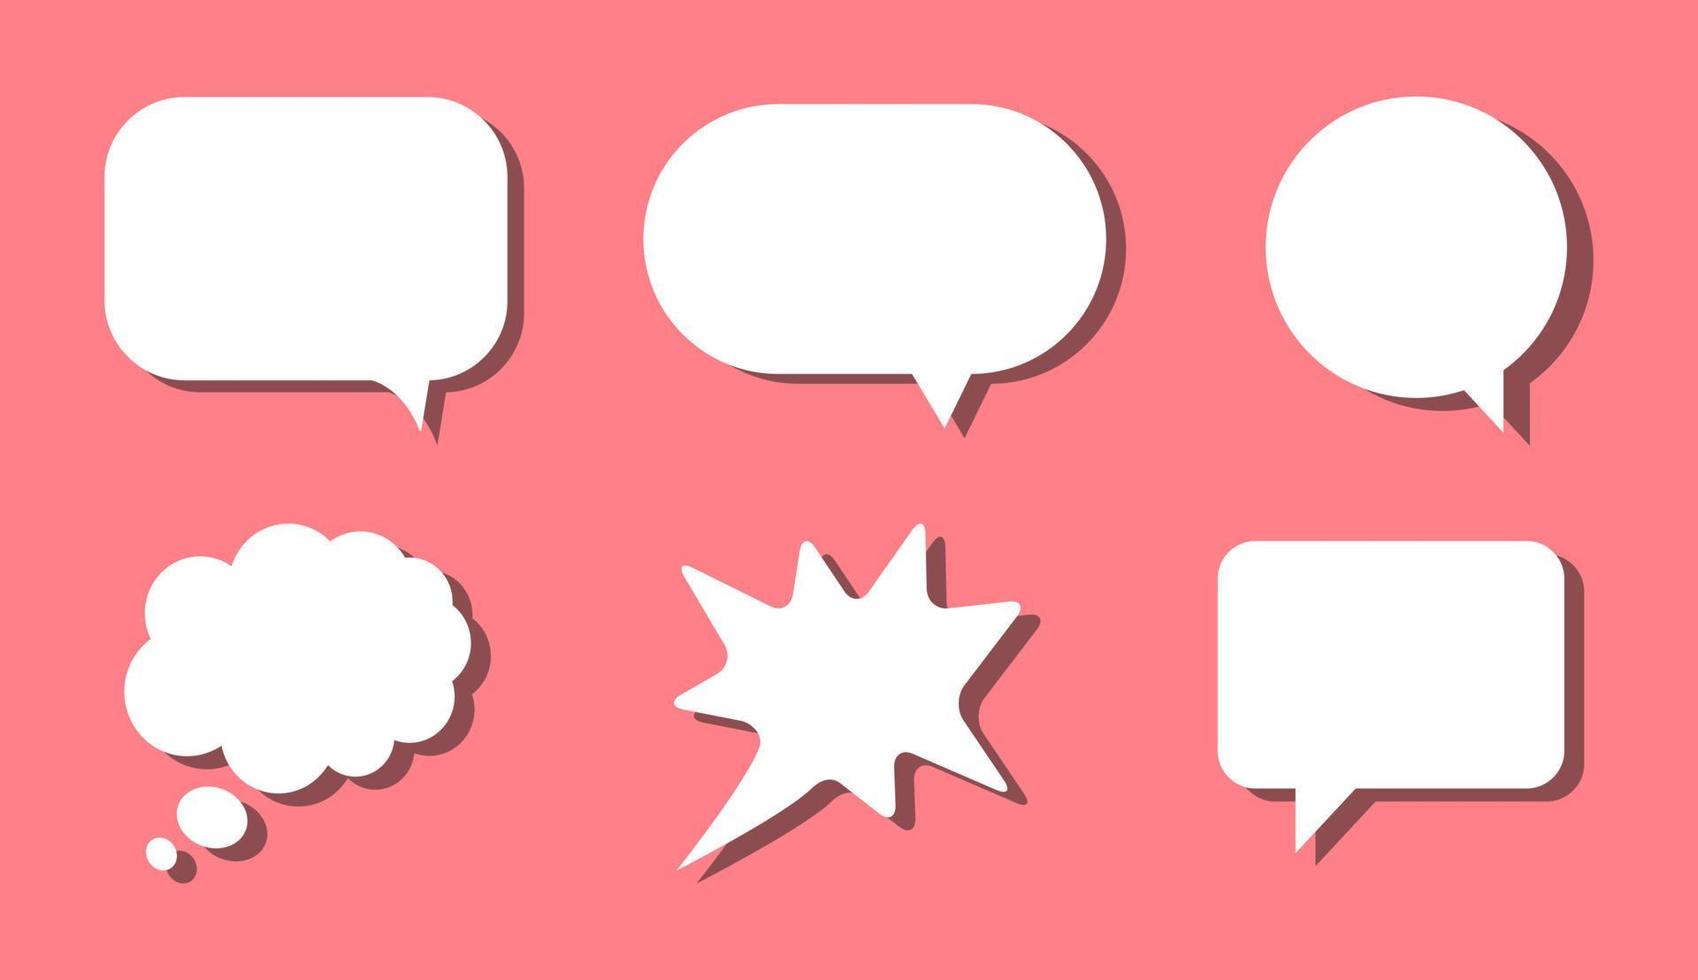 3d speech bubble chat icon collection isolated on pink background. Vector illustration